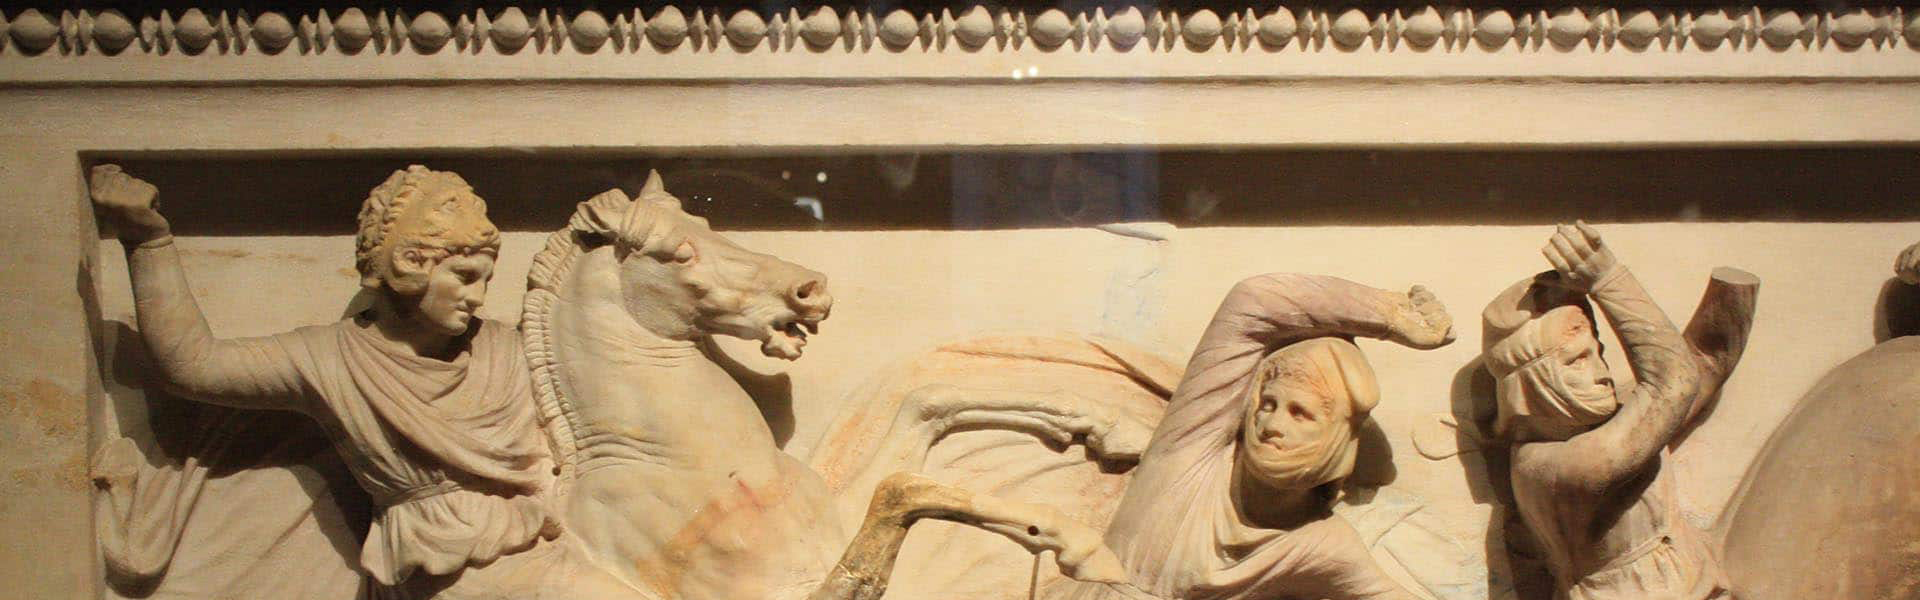 pid000524_Sidon_Lebanon_2012_06_Details-of-Alexander-Sarcophagus-Banner-for-Page-1920x600